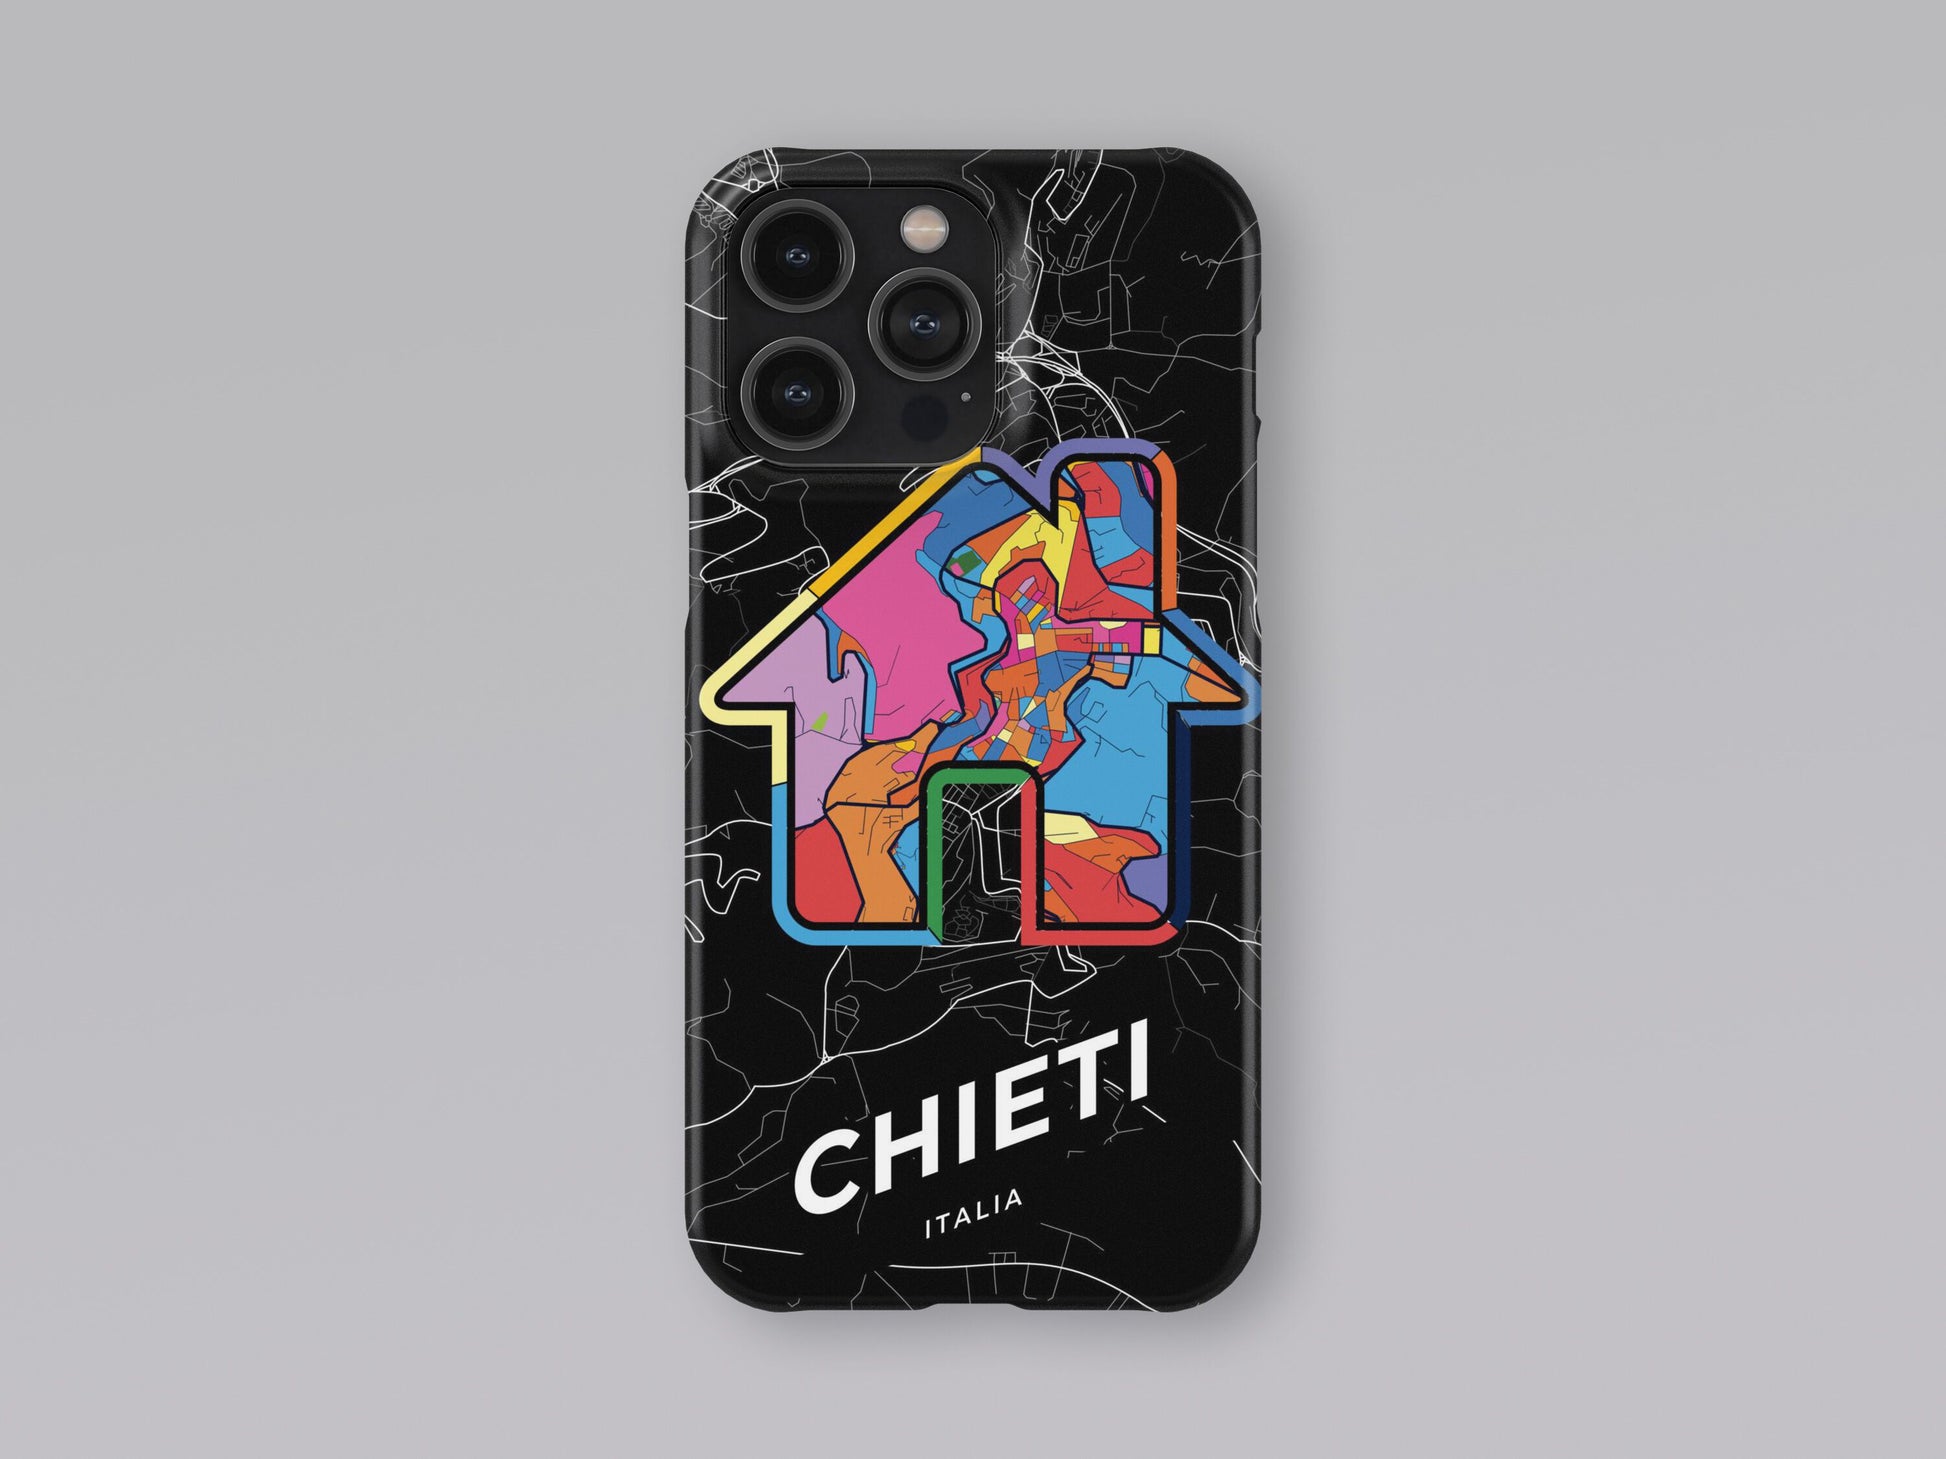 Chieti Italy slim phone case with colorful icon. Birthday, wedding or housewarming gift. Couple match cases. 3